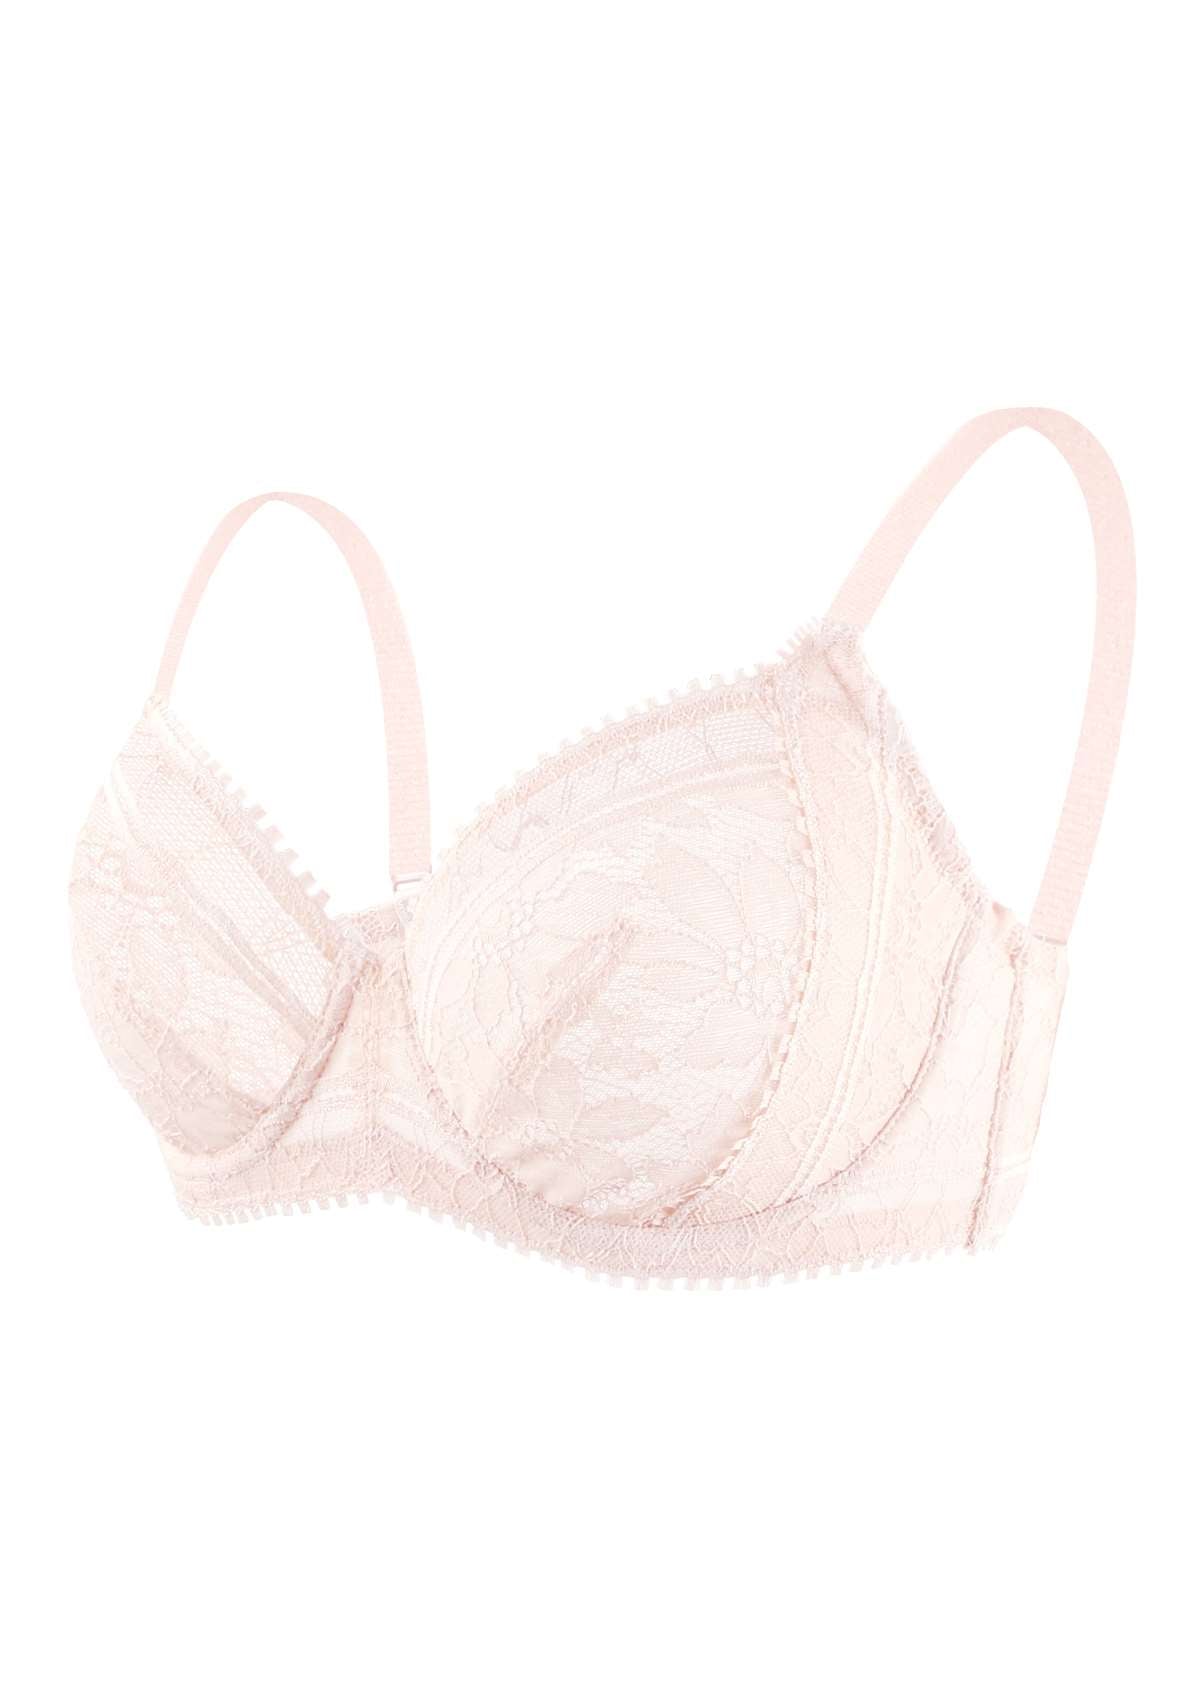 HSIA Silene Floral Delicate Unlined Lace Soft Cup Uplift Bra - Heavenly Pink / 34 / C